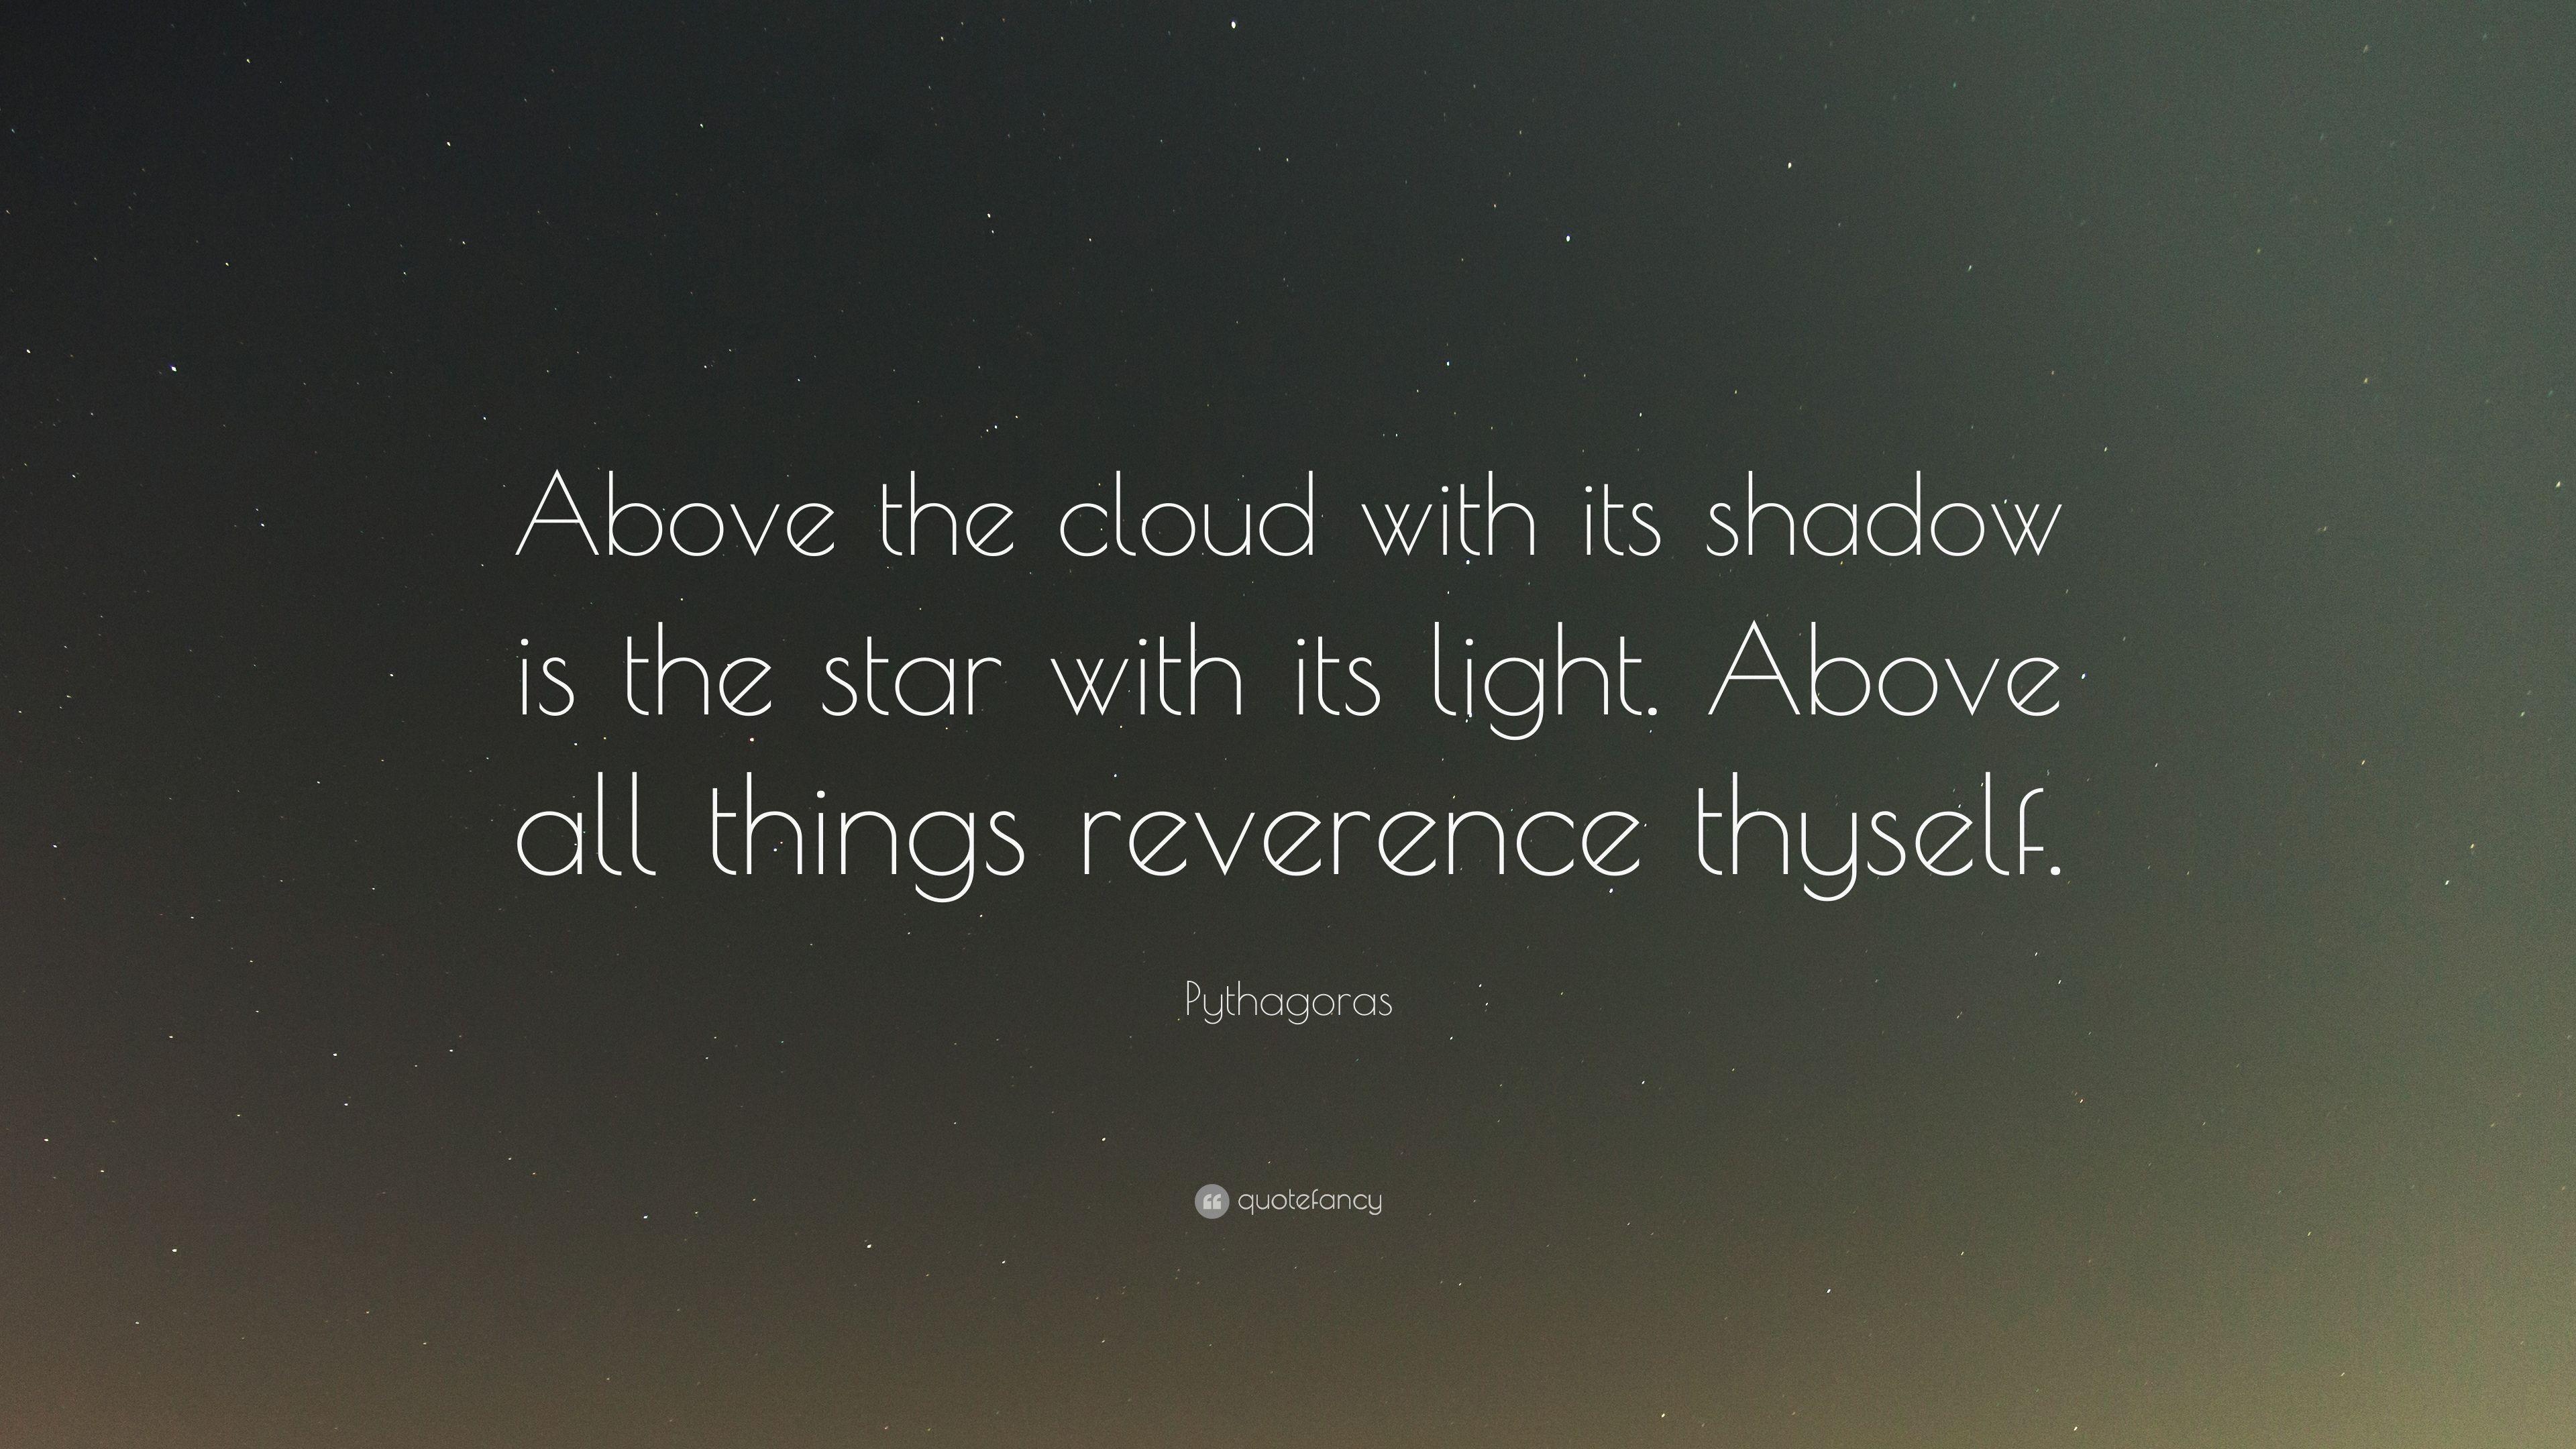 Pythagoras Quote: “Above the cloud with its shadow is the star